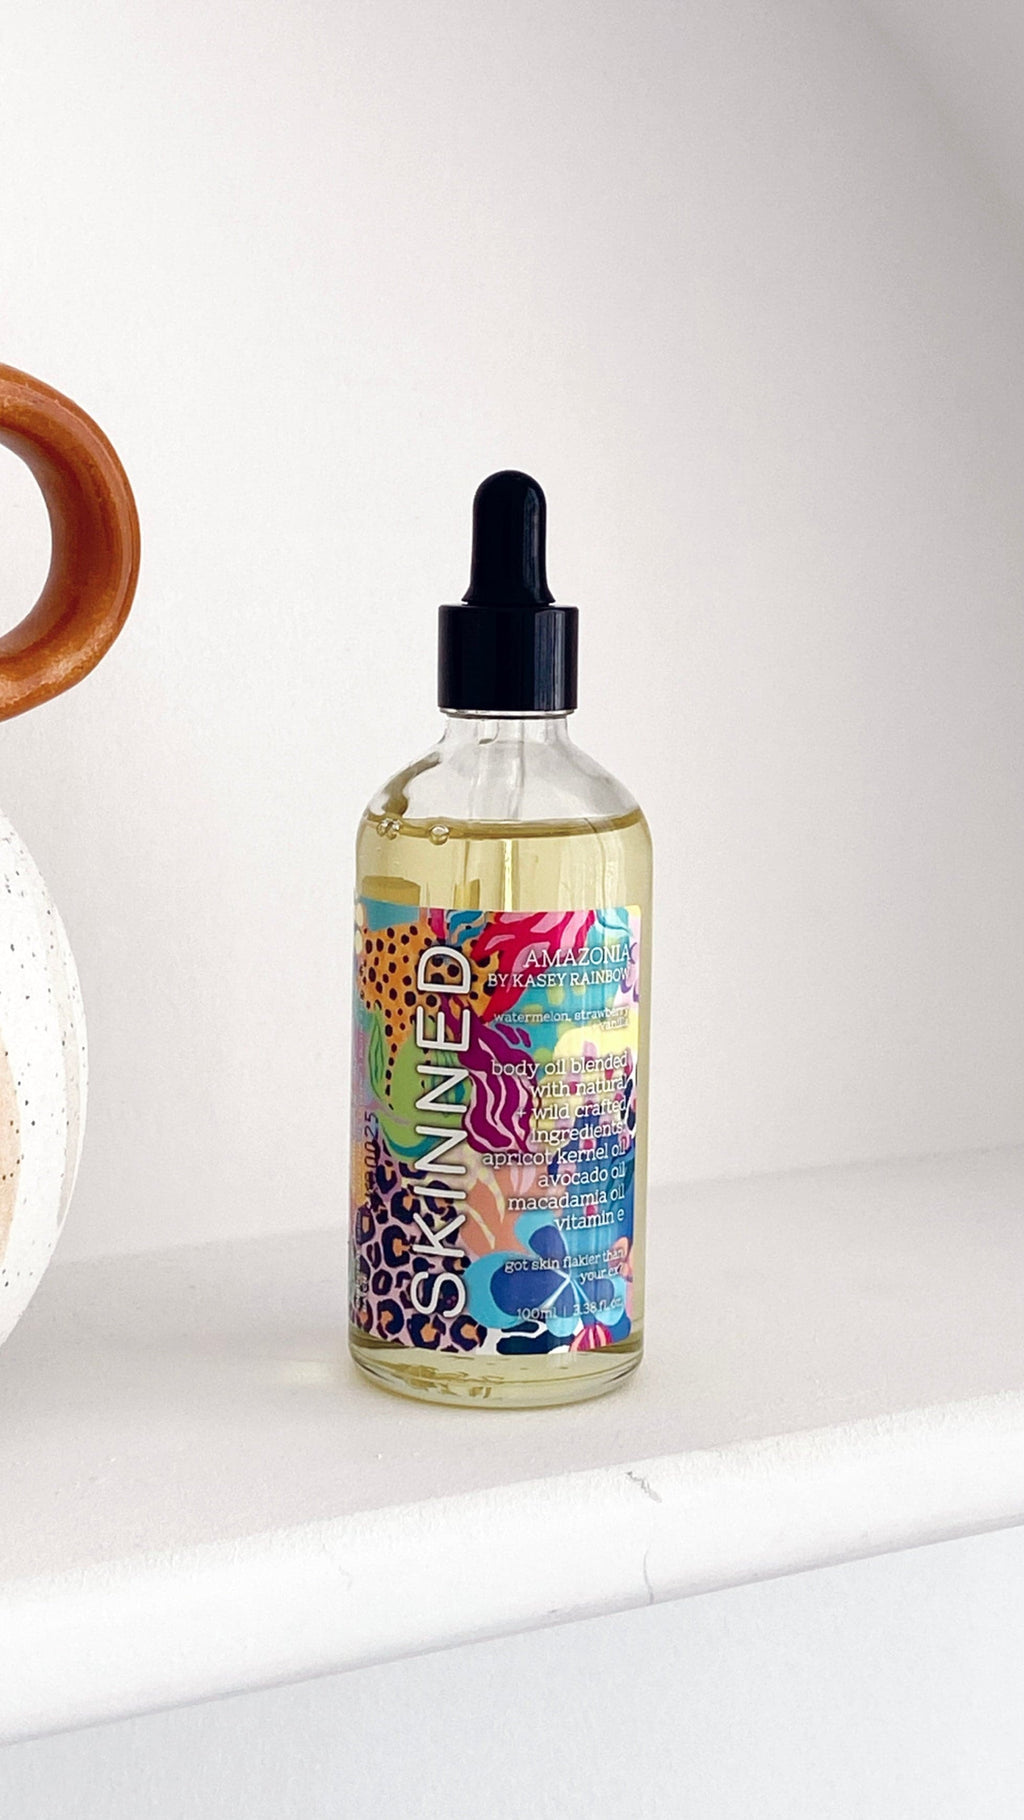 Amazonia Body Oil by Kasey Rainbow - Limited Addition